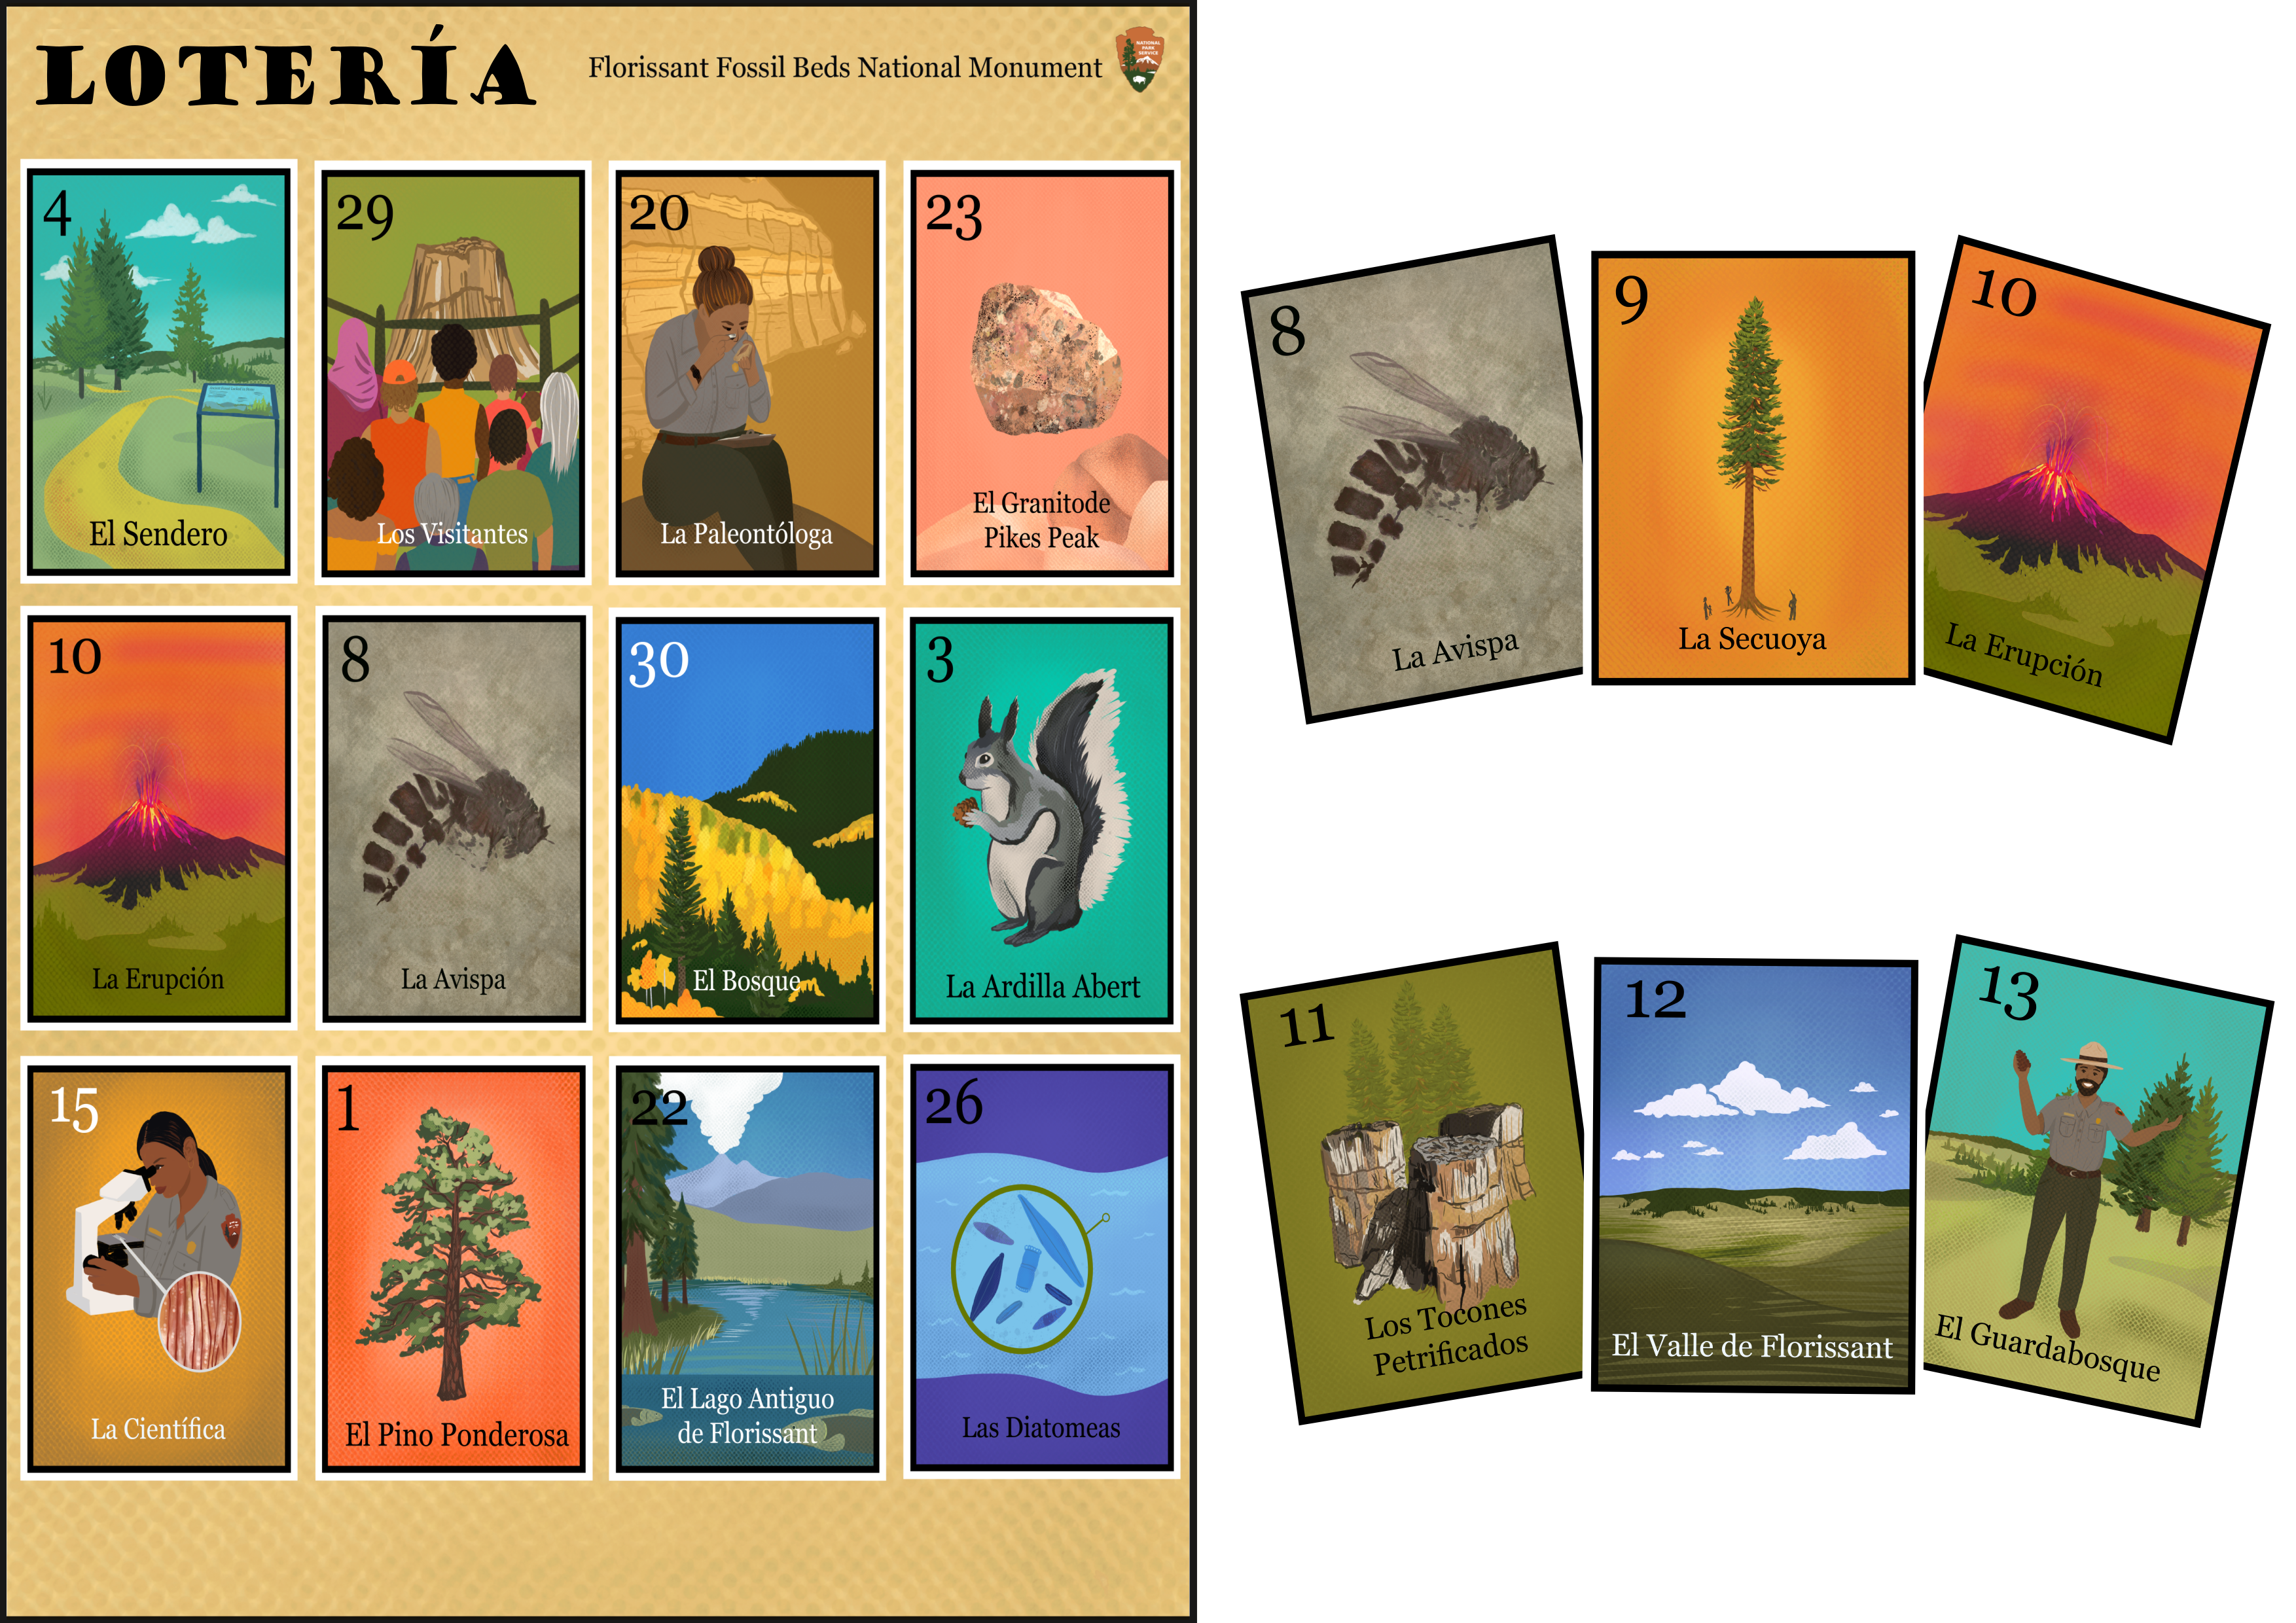 On the left is a gameboard called a tabla for the Loteria game that displays 12 cards of Eocene and modern Florissant including, fossils, plants, wildlife, and people. On the right are six staggered cards.